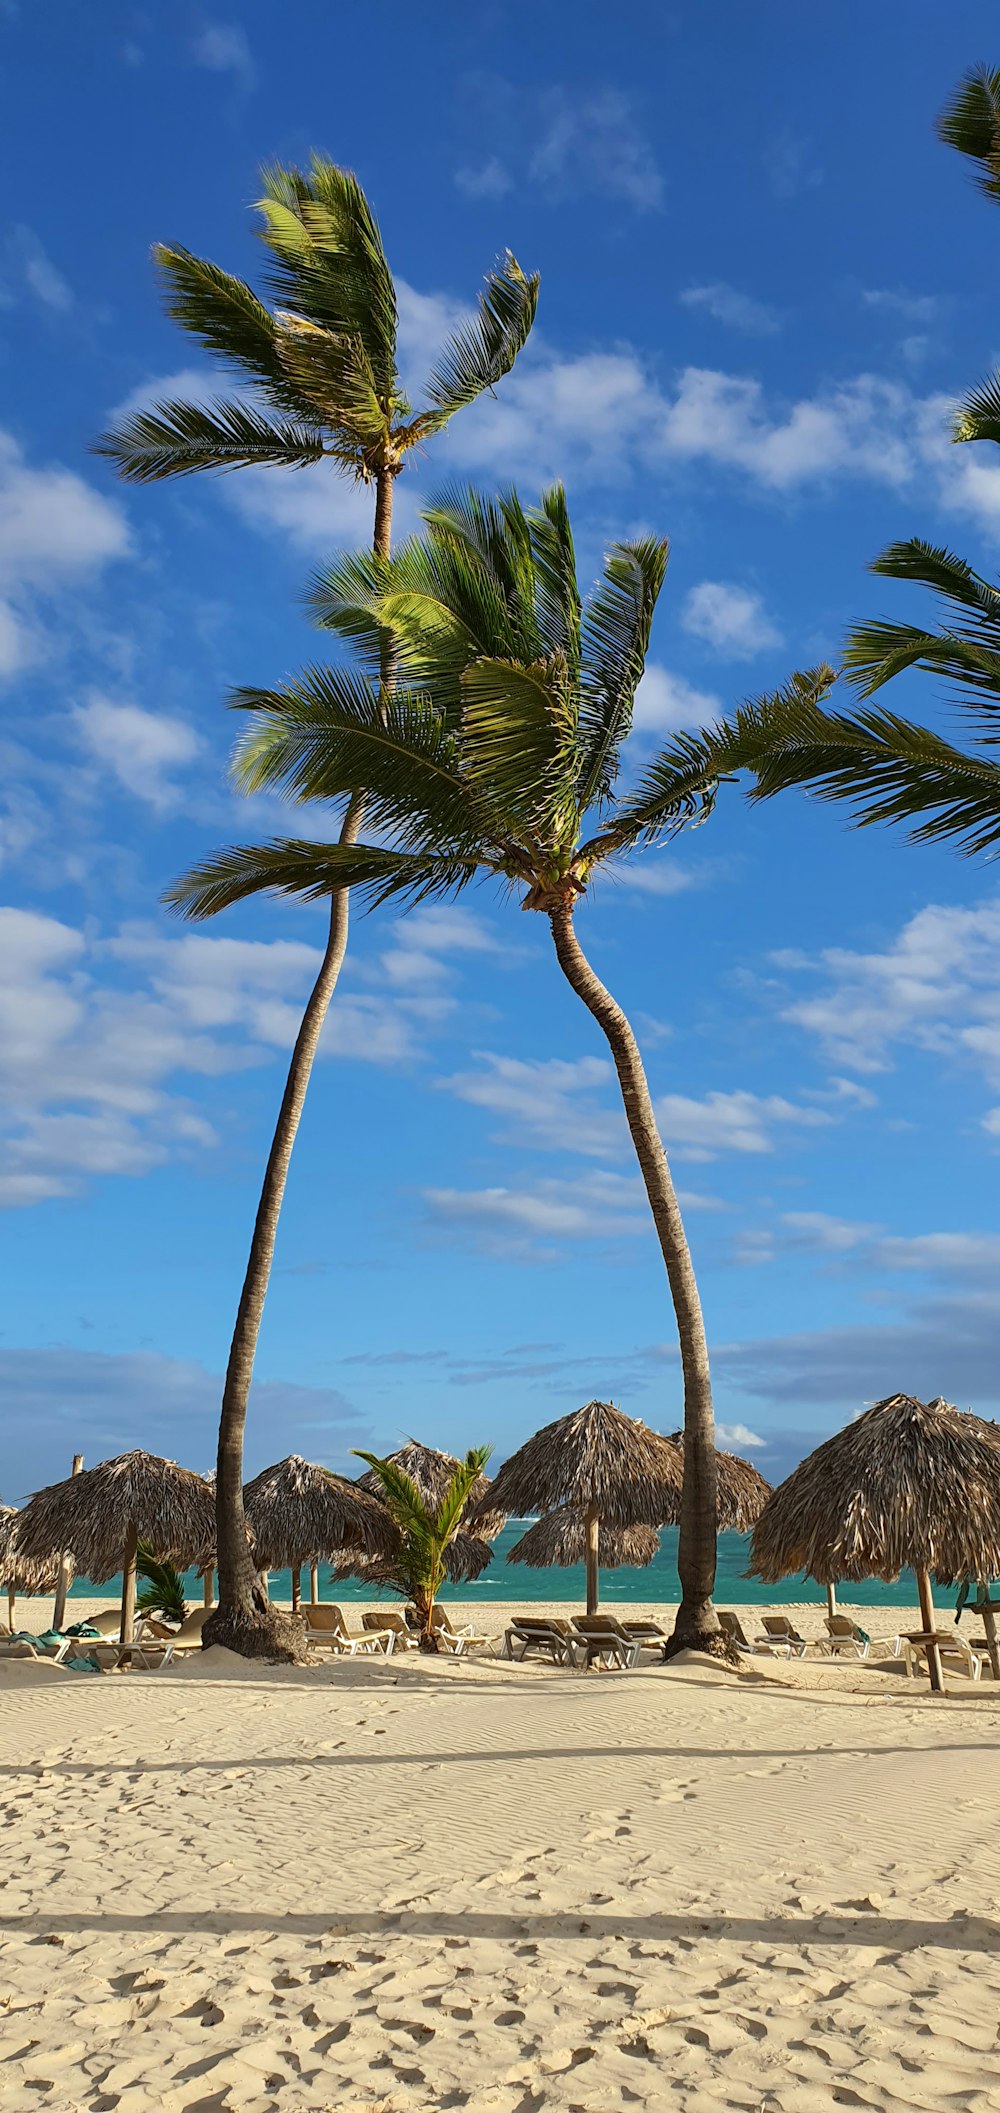 a sandy beach with palm trees and thatched umbrellas